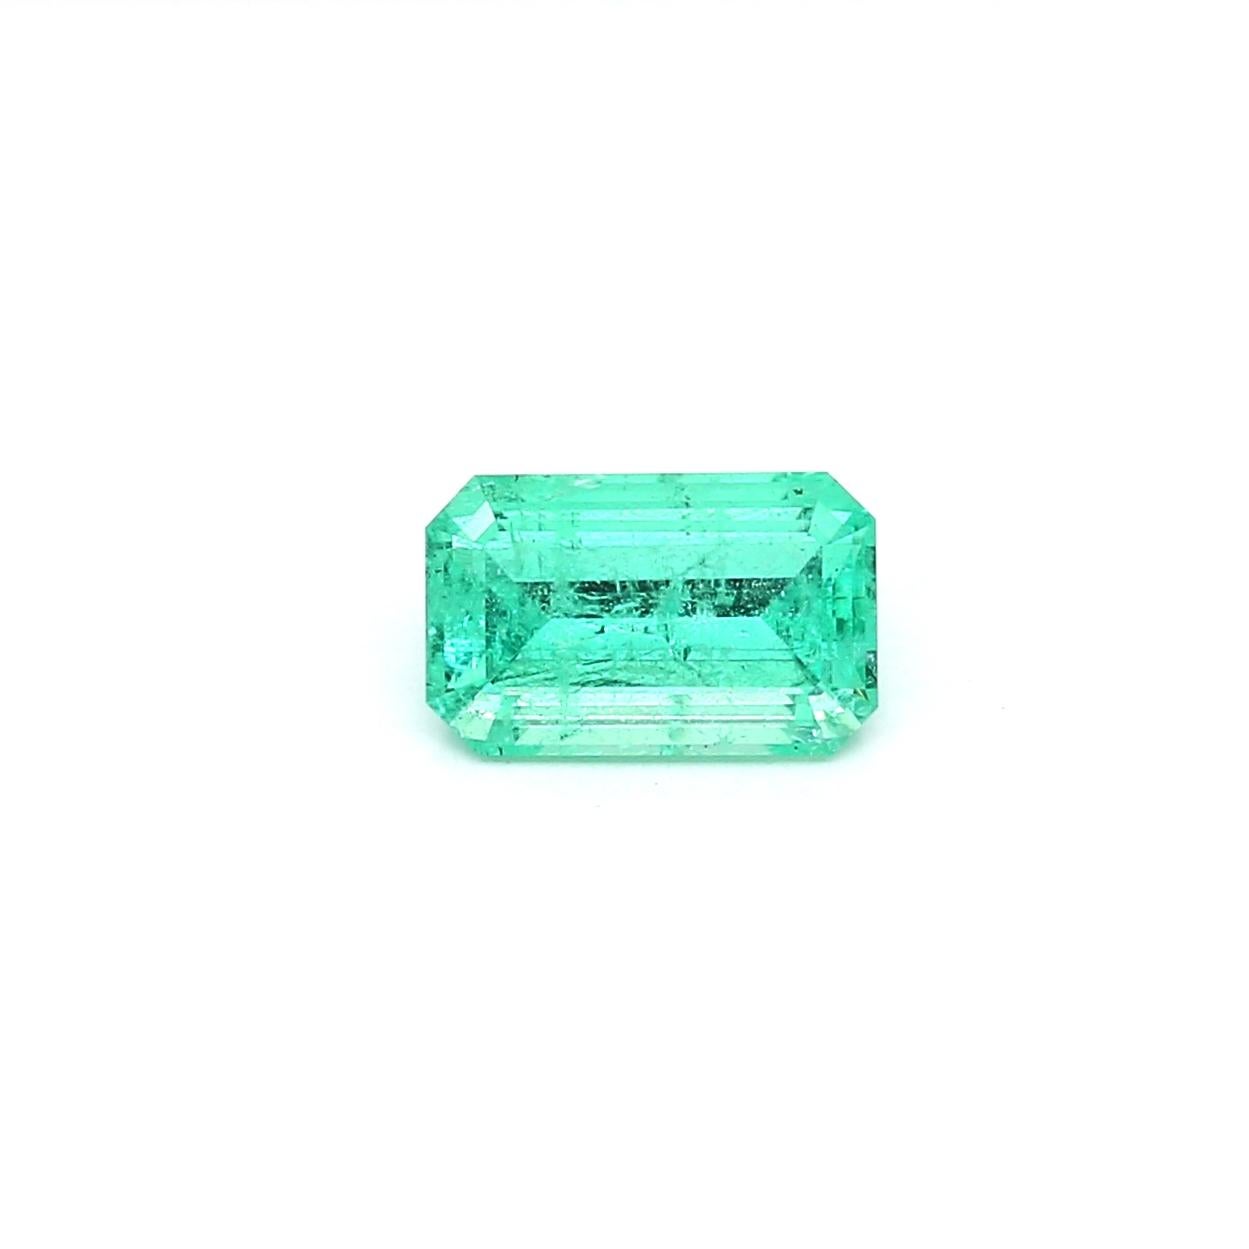 An amazing Russian Emerald which allows jewelers to create a unique piece of wearable art.
This exceptional quality gemstone would make a custom-made jewelry design. Perfect for a Ring or Pendant.

Shape - Octagon
Weight - 1.12 ct
Treatment -